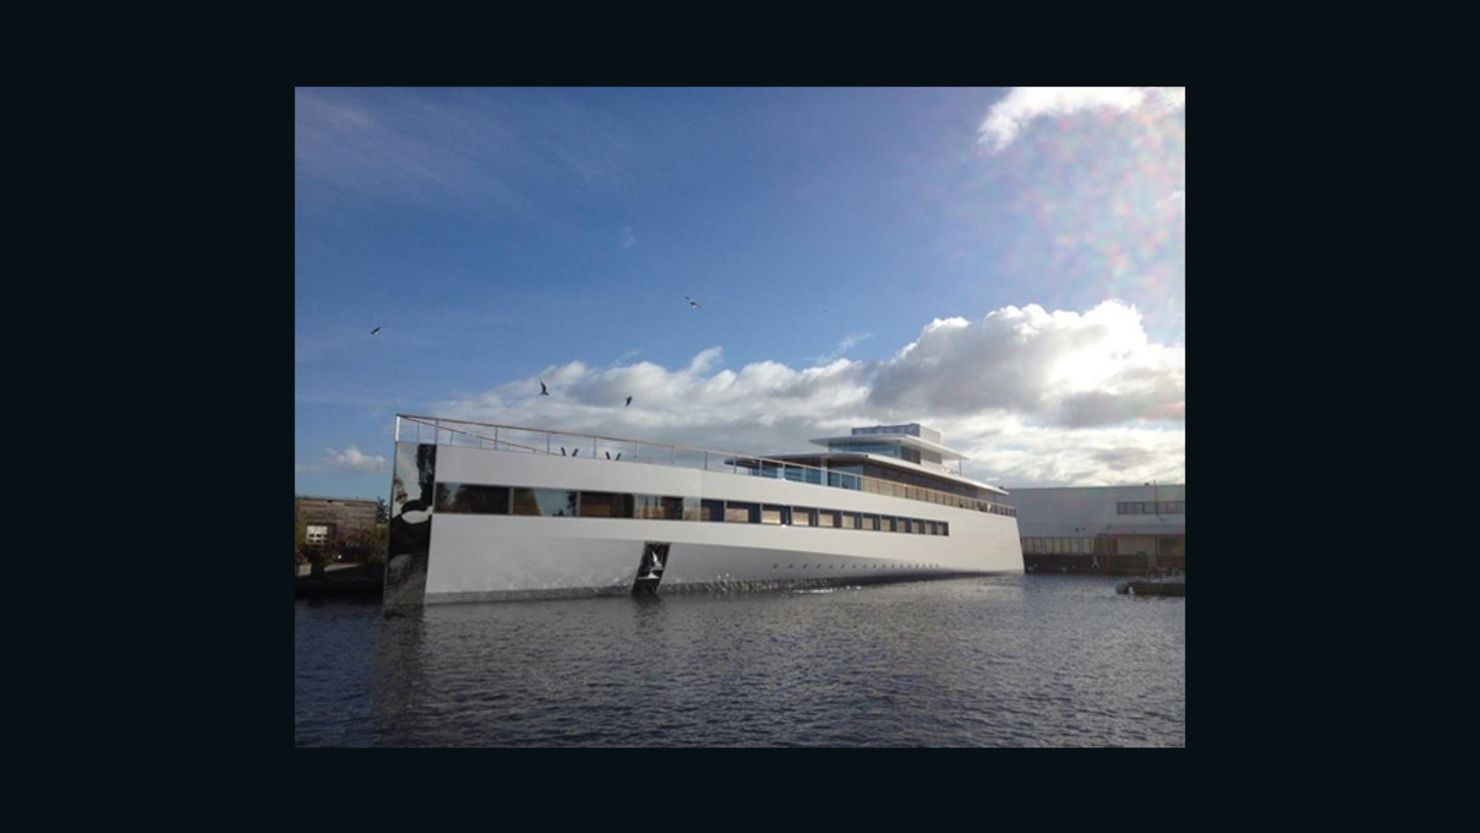 Late Apple co-founder Steve Jobs' yacht was unveiled in a Dutch shipyard in October and christened "Venus."